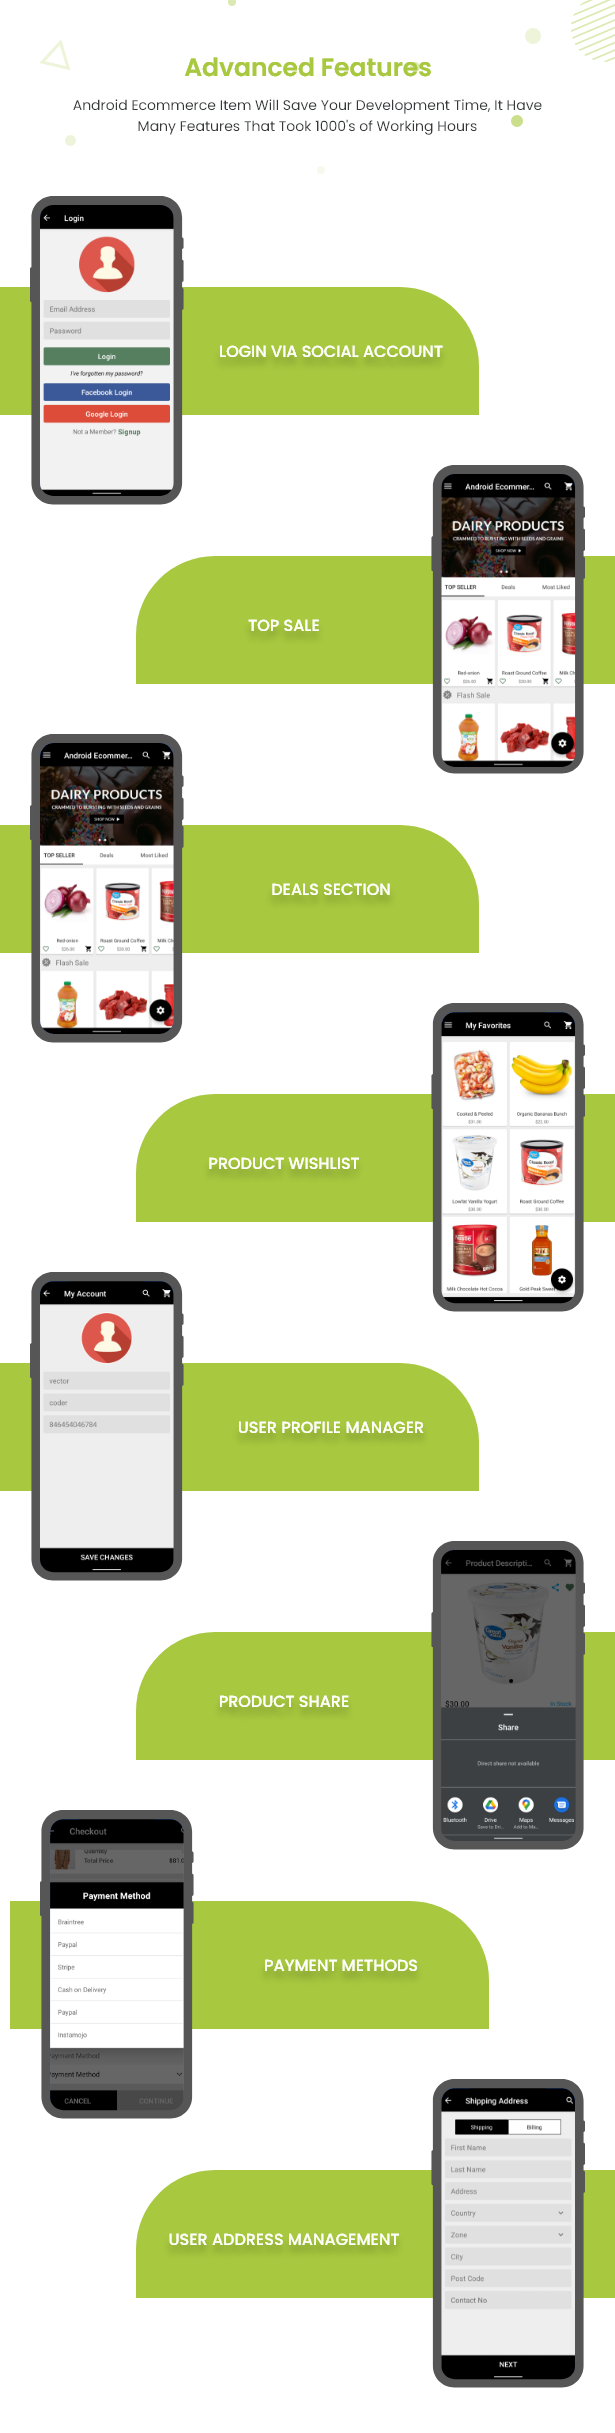 Android Ecommerce - Universal Android Ecommerce / Store Full Mobile App with Laravel CMS - 23